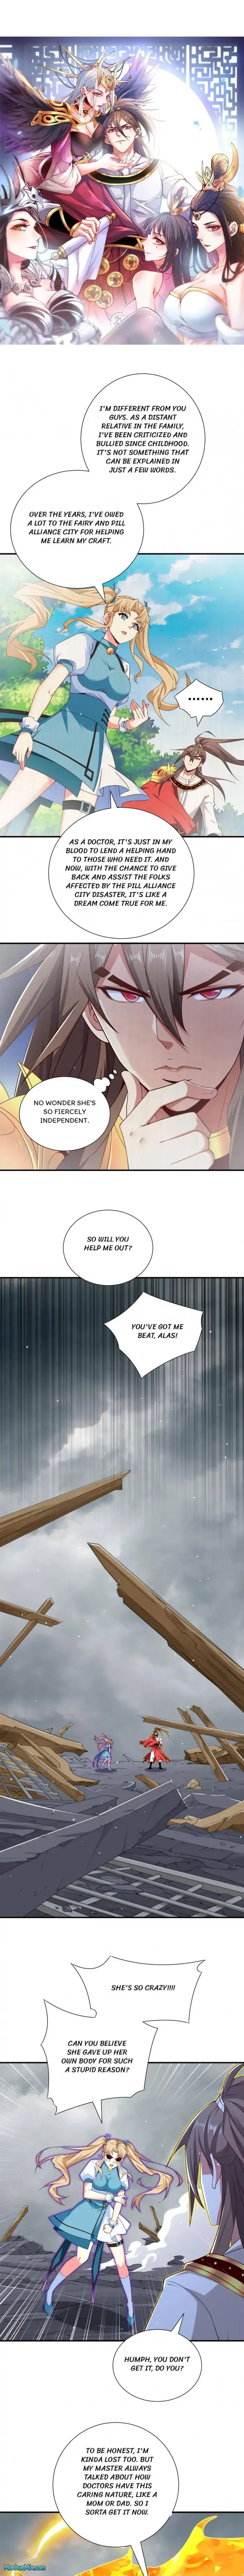 99 Ways to Become Heroes by Beauty Masters Chapter 218 page 1